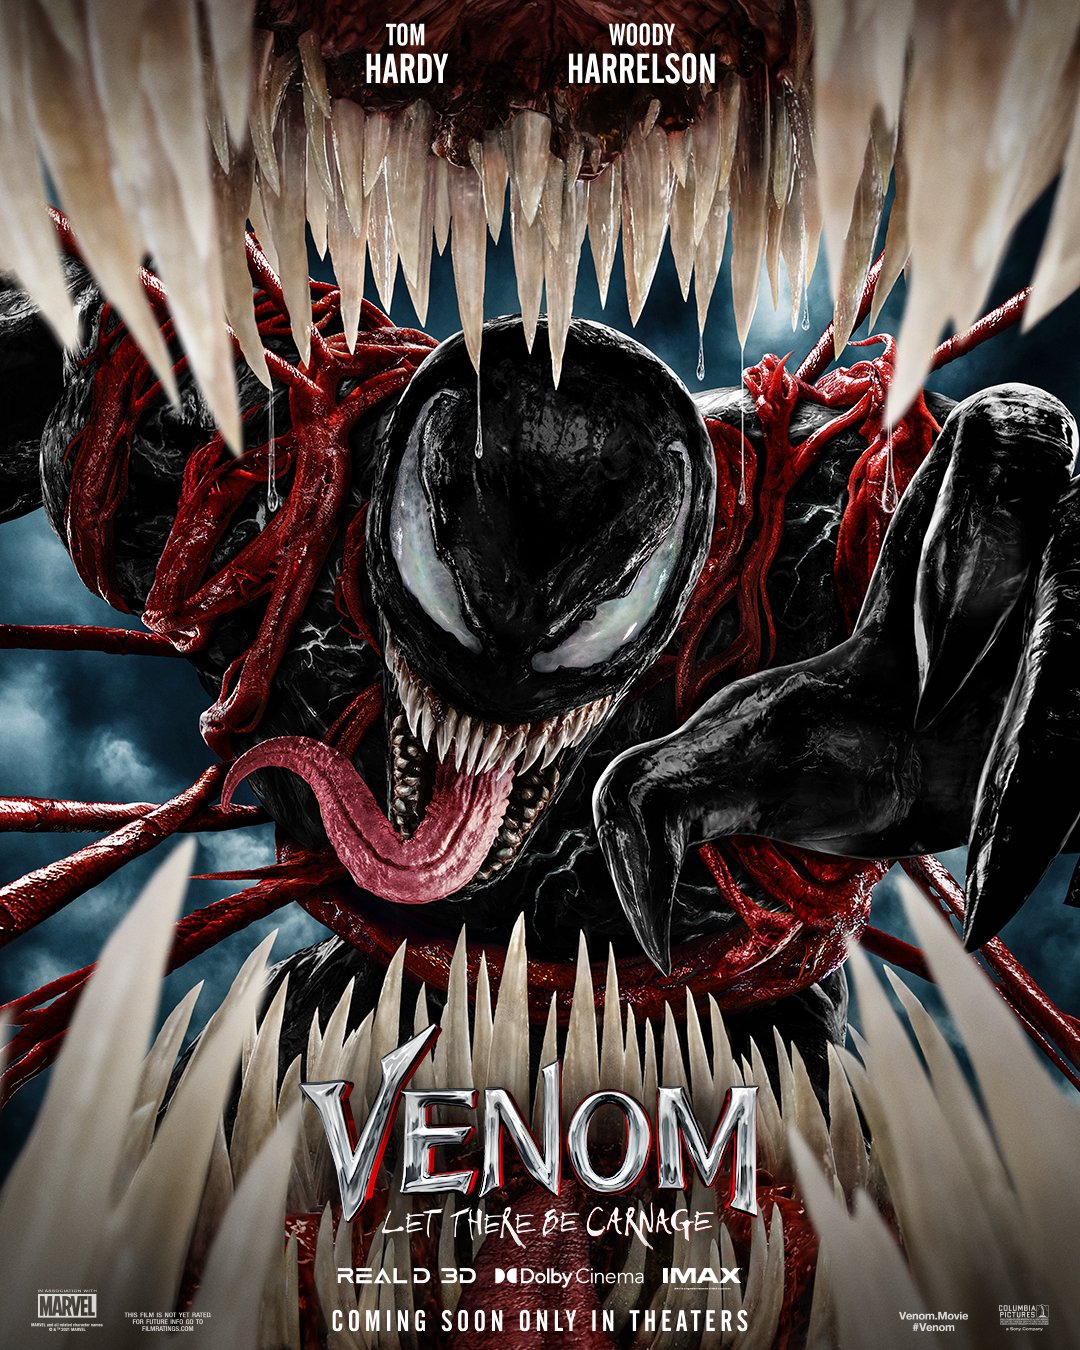 VENOM: LET THERE BE CARNAGE (2021) Reviews and overview - MOVIES and MANIA